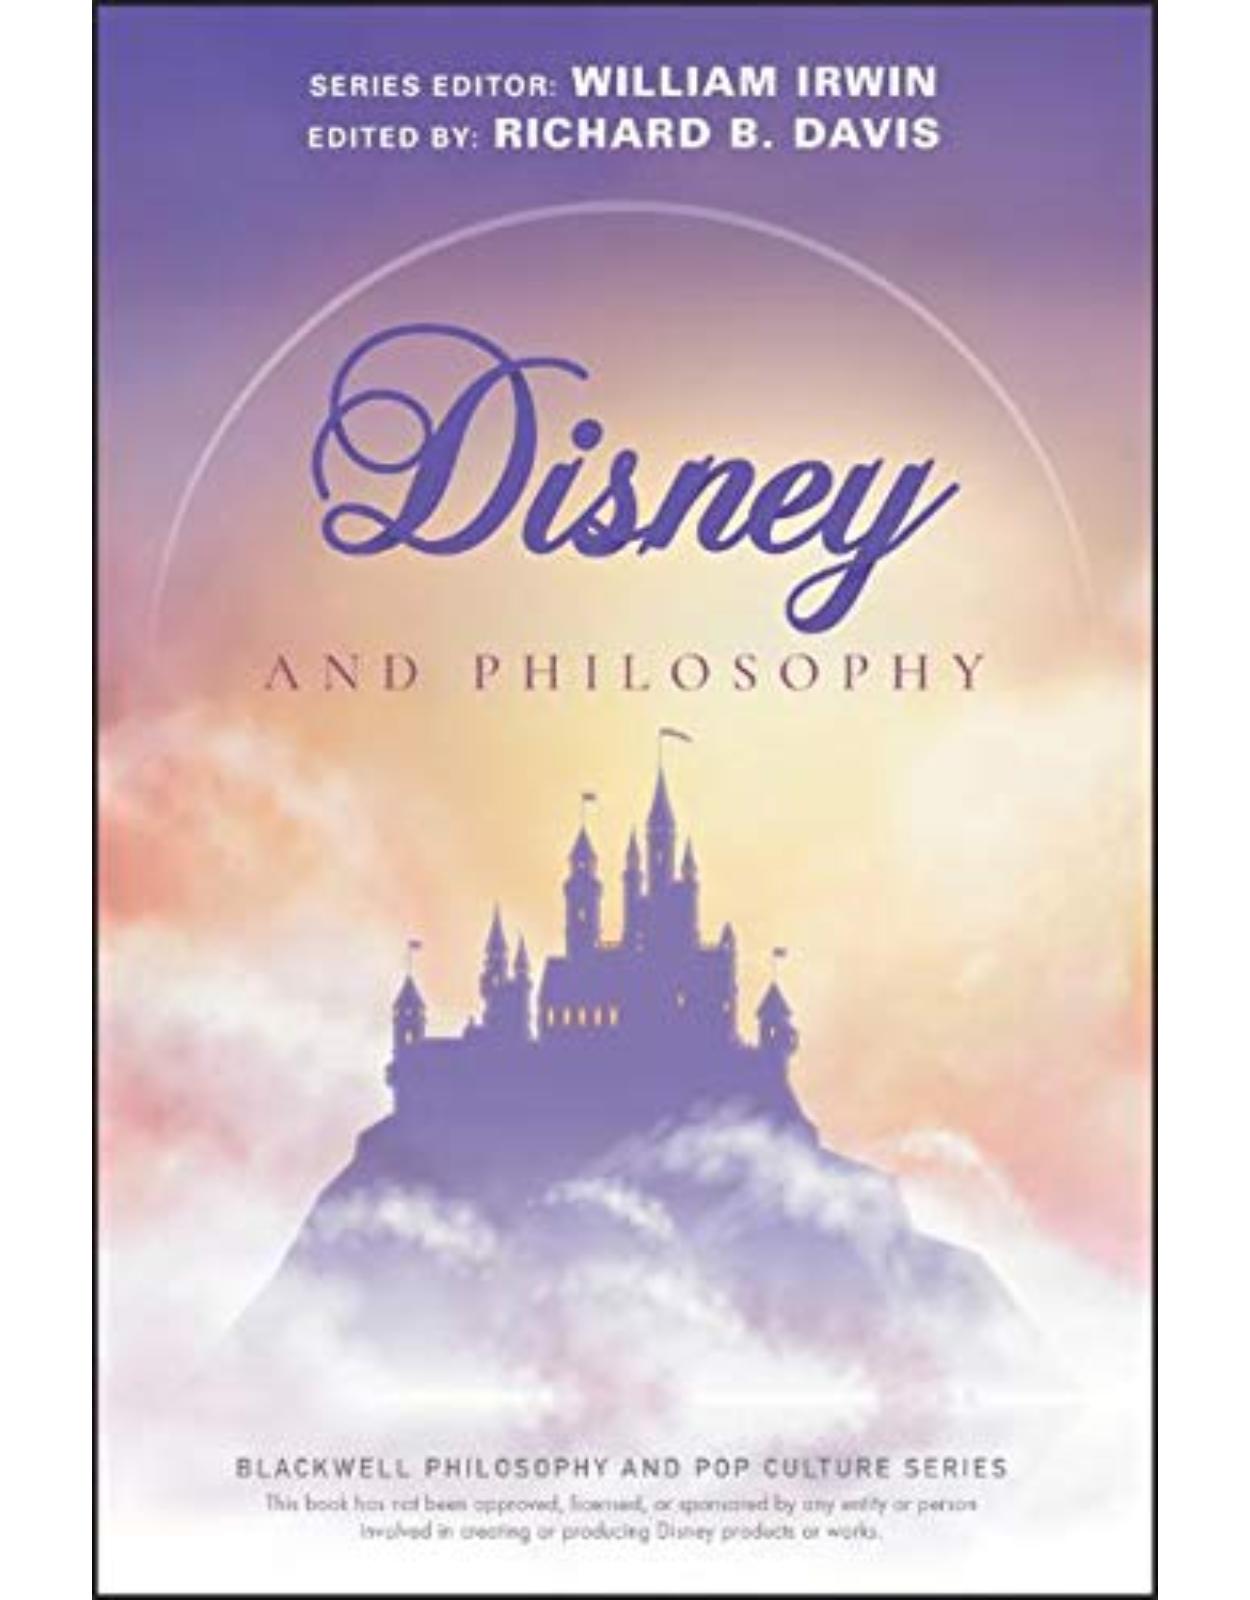 Disney and Philosophy: Truth, Trust, and a Little Bit of Pixie Dust